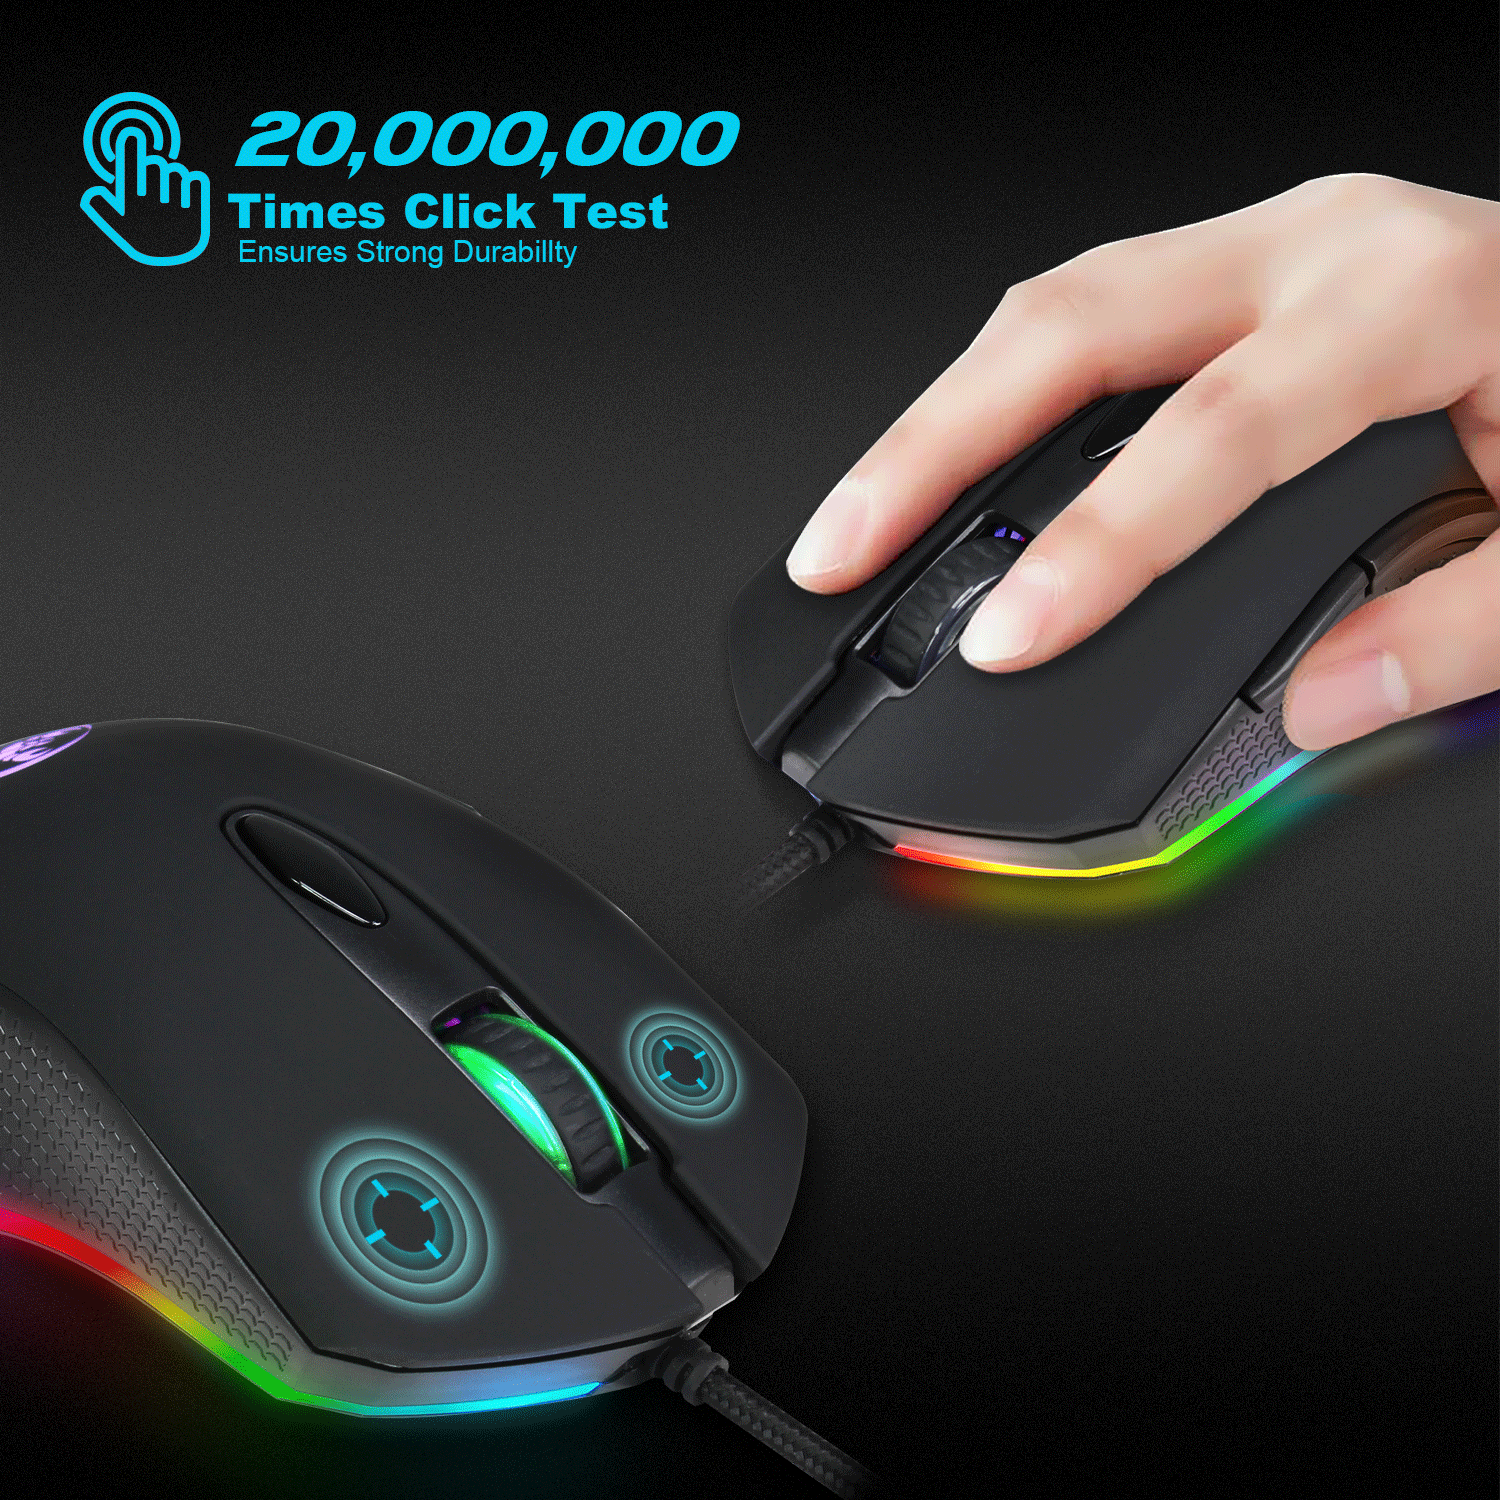 HXSJ S500 RGB Backlit Gaming Mouse 6 Buttons 4800DPI Optical USB Wired Mice Macros Define 8